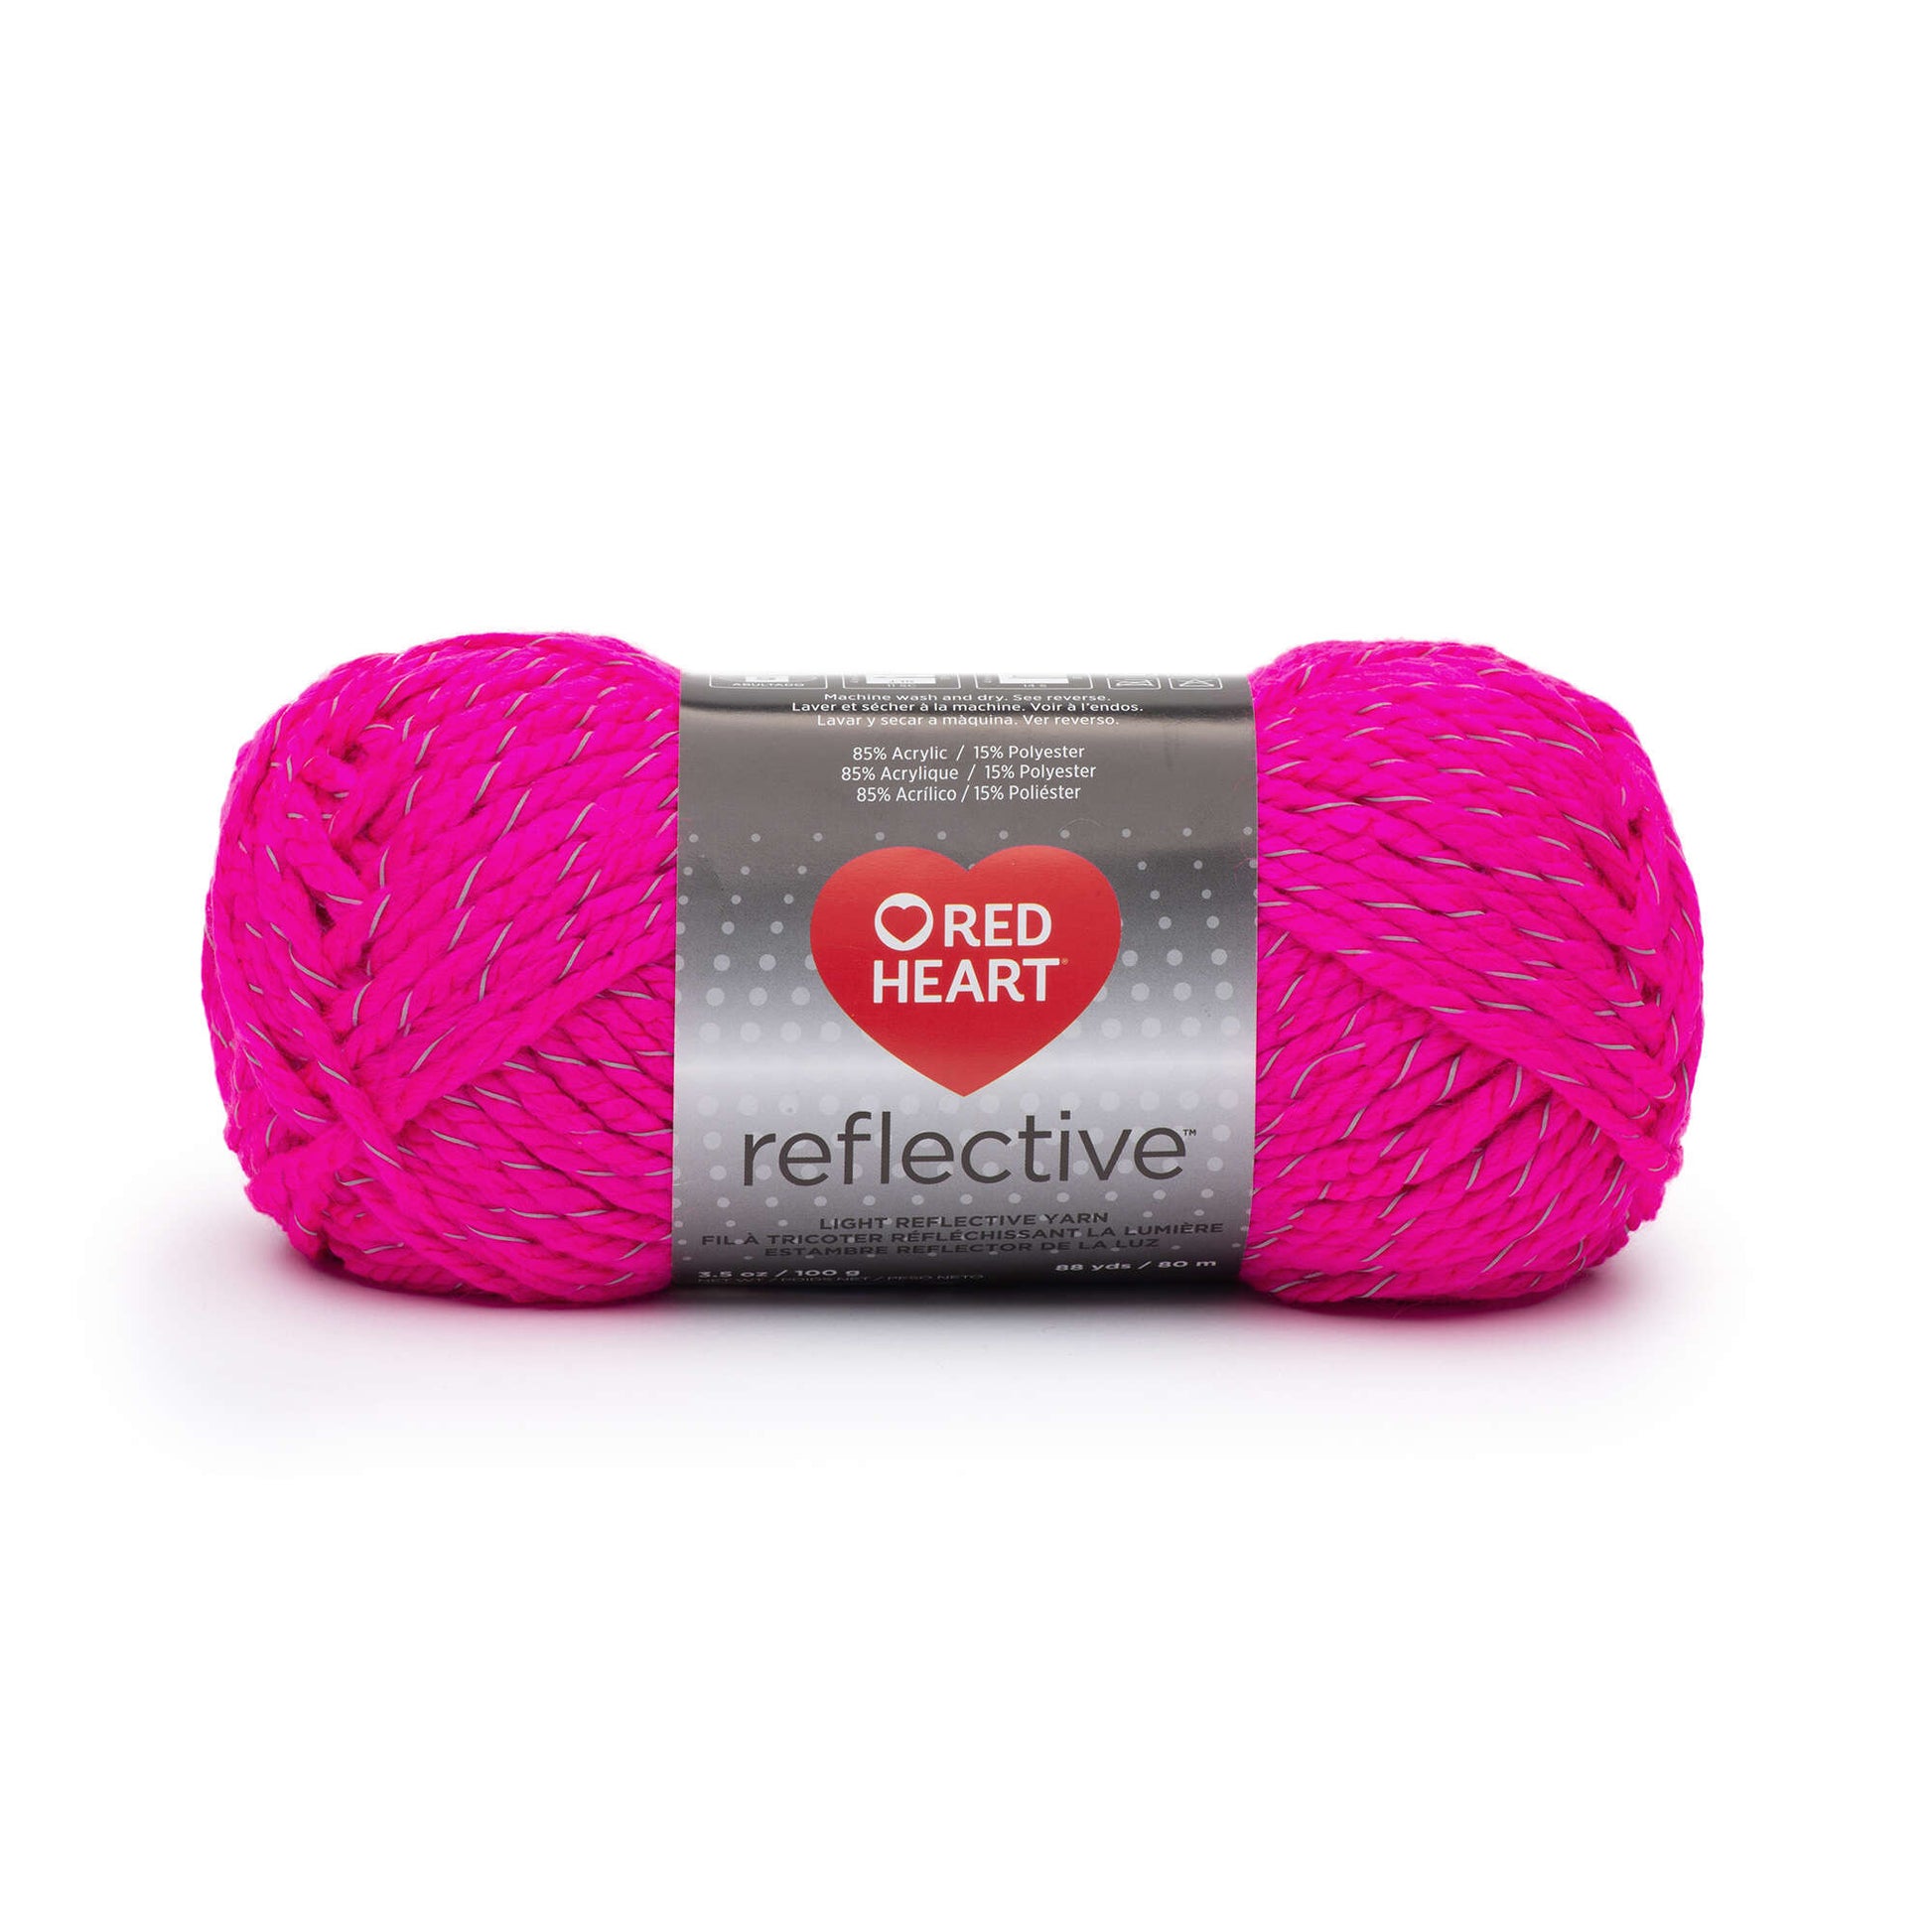 Red Heart Reflective Yarn - Discontinued Shades Neon Pink